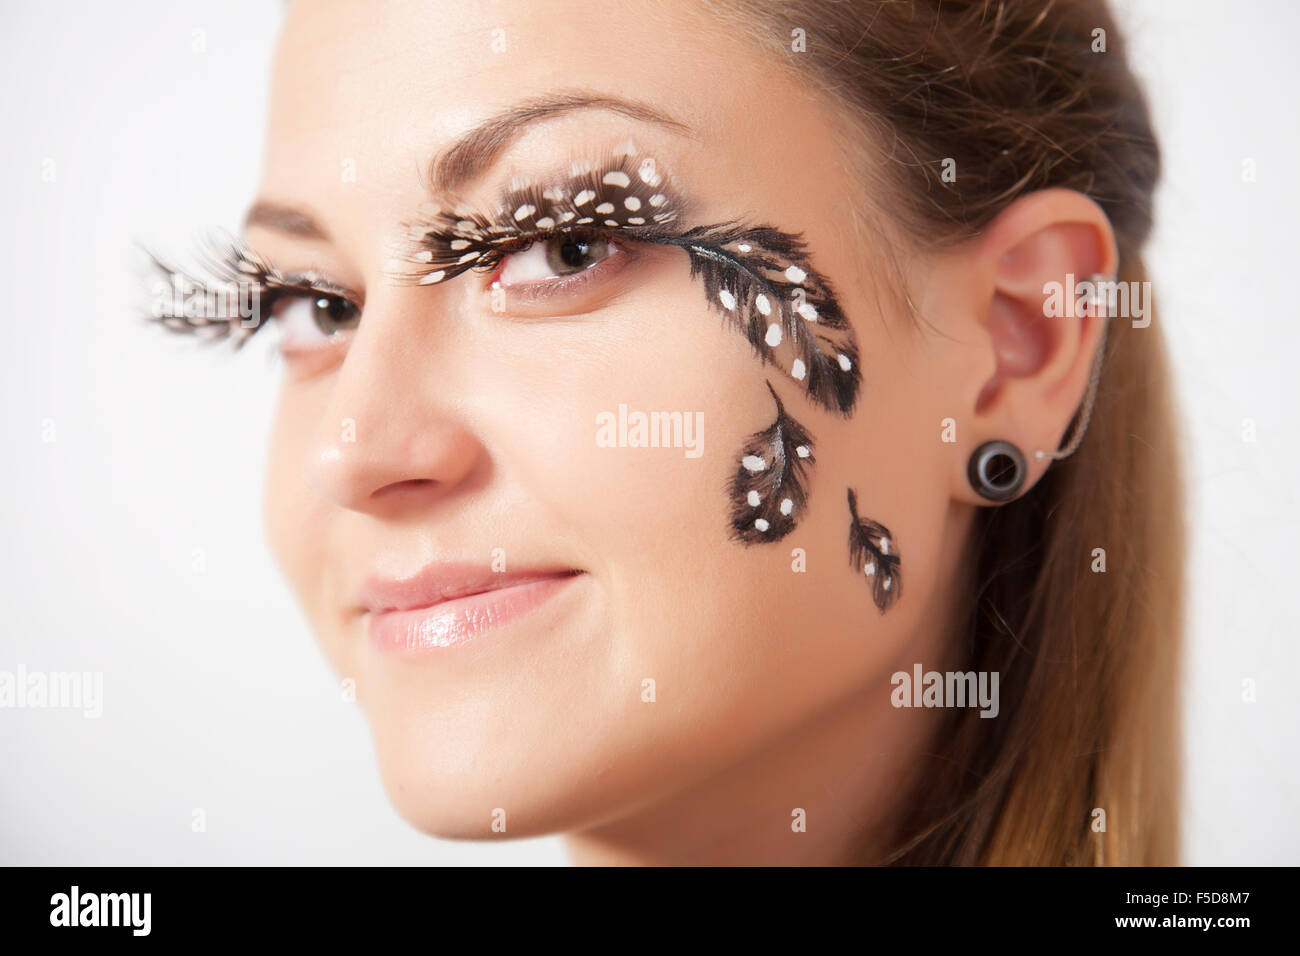 Beautiful woman with long eyelashes and face-art, close-up Stock Photo